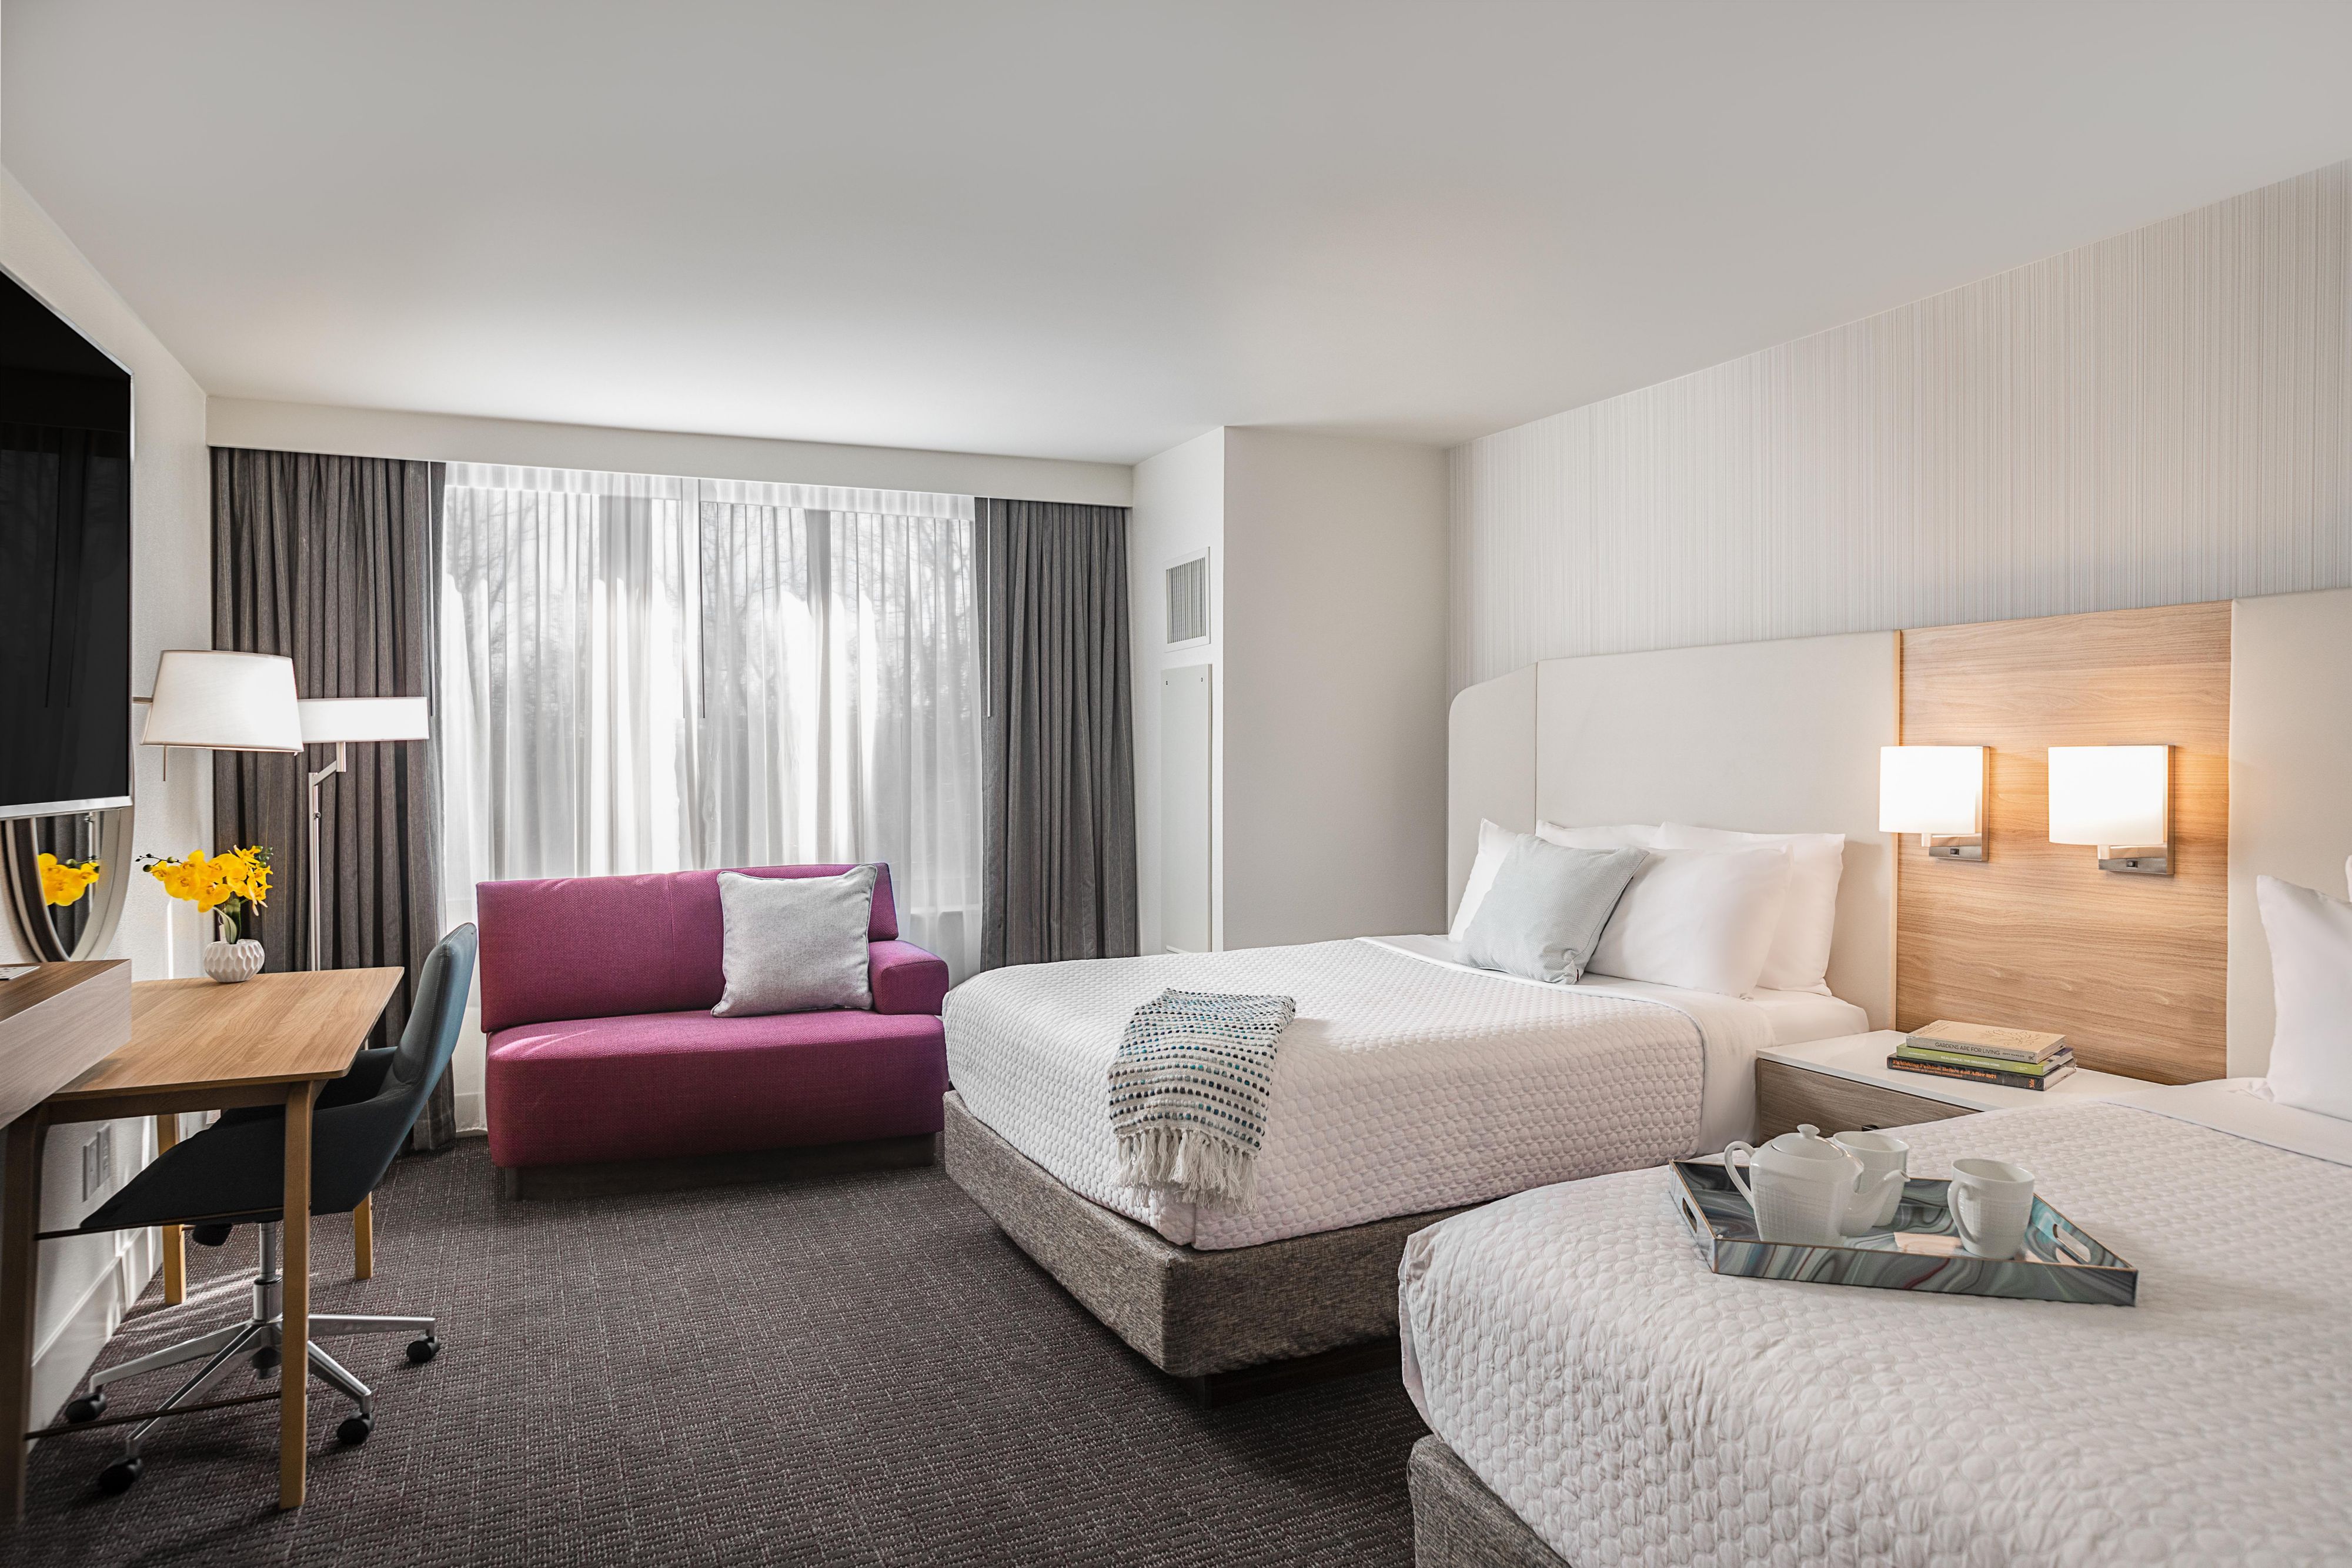 Relax in our double queen hotel rooms in Atlanta near Perimeter.